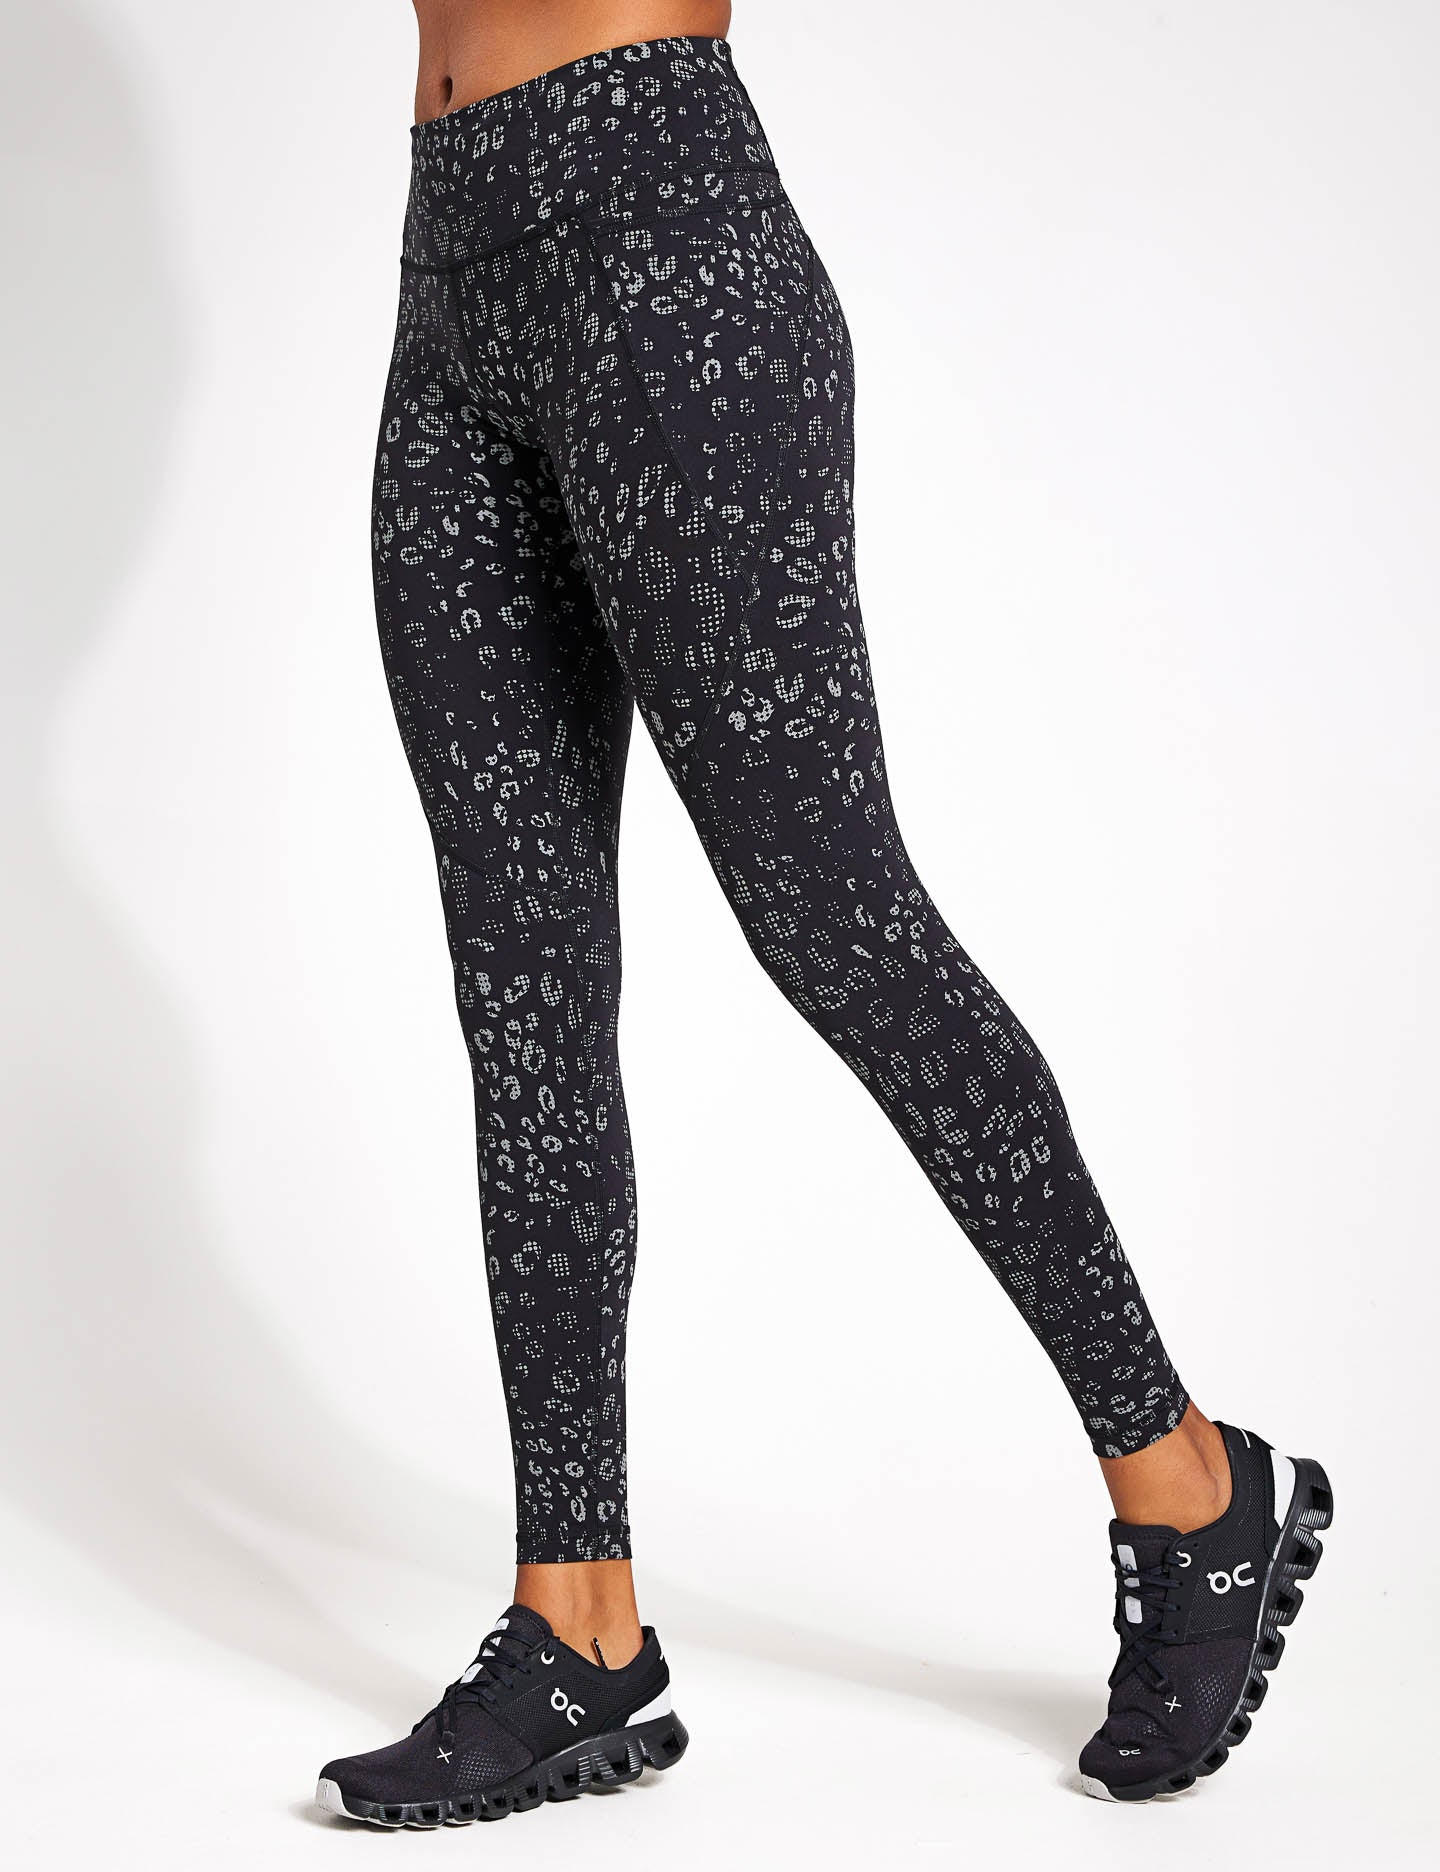 Leopard Print High Waist Leopard Print Gym Leggings For Women Sexy Fitness  Pants For Gym, Yoga, And Sports From Crosslery, $15.65 | DHgate.Com